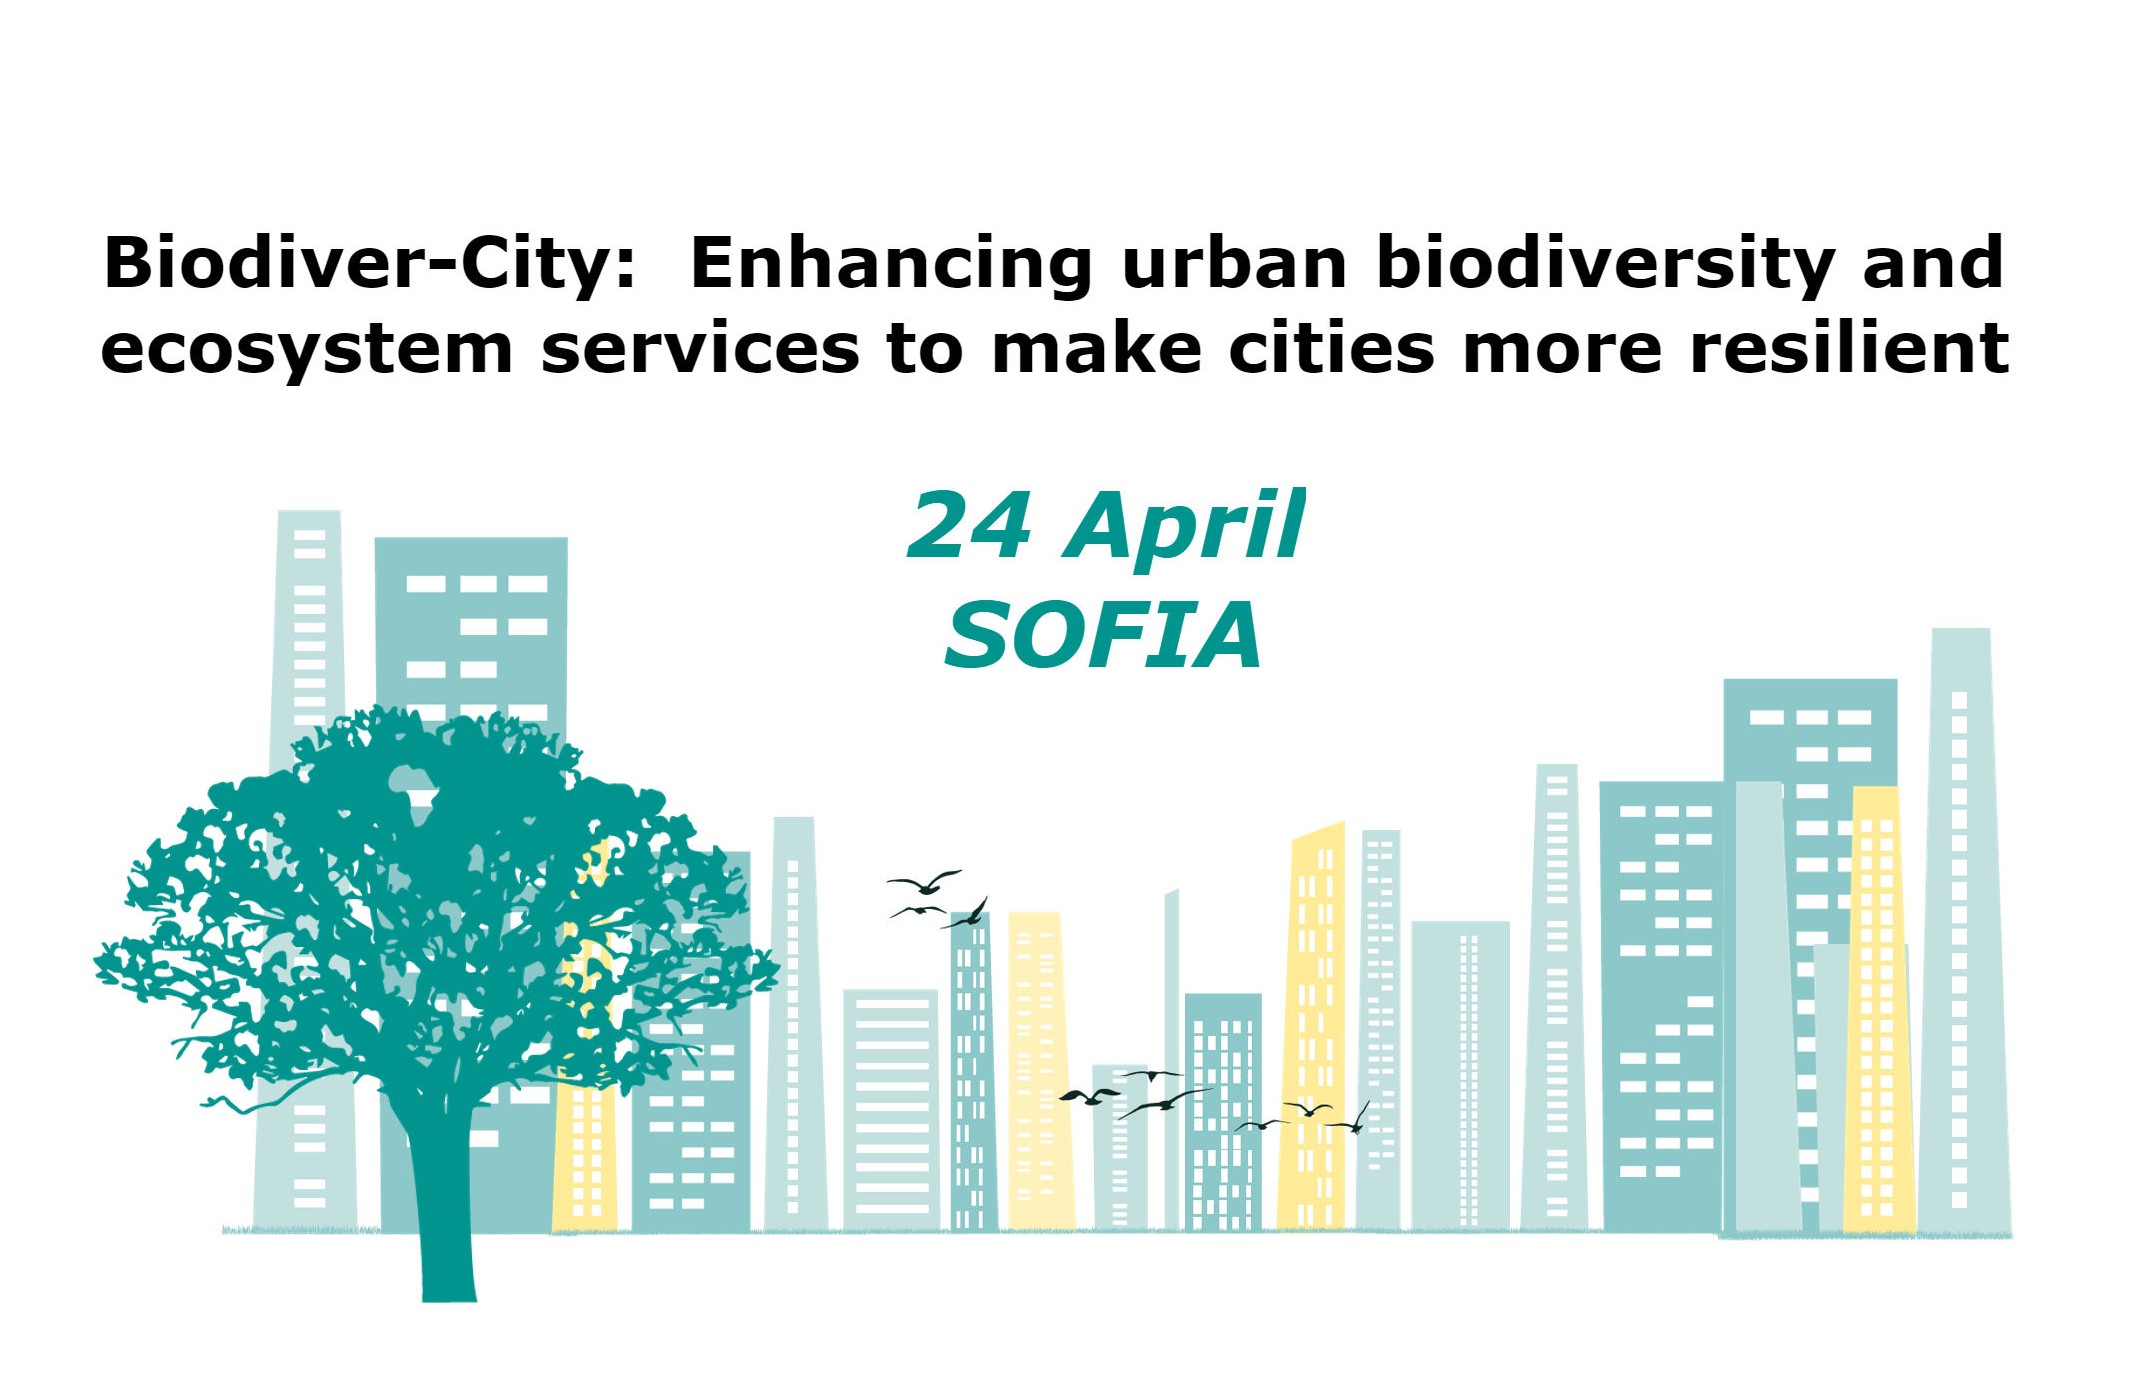 Biodiver-City: Enhancing urban biodiversity and ecosystem services to make cities more resilient